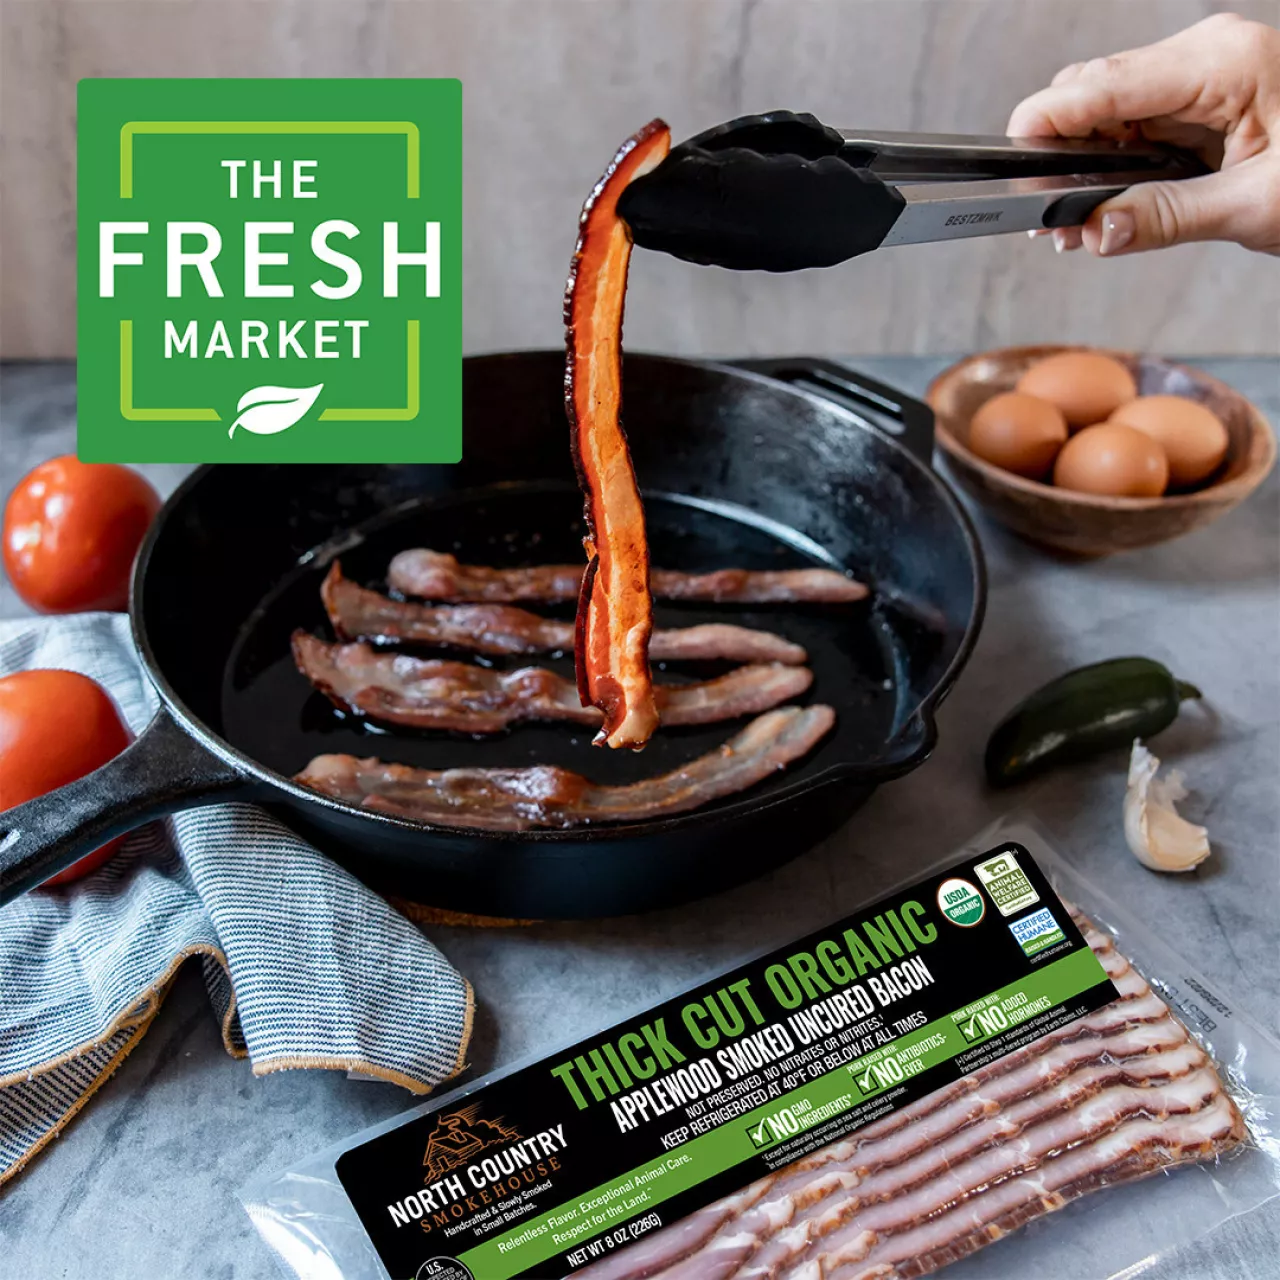 New Organic Thick Cut Applewood Smoked Bacon produced by North Country Smokehouse is now available at The Fresh Market. img#1